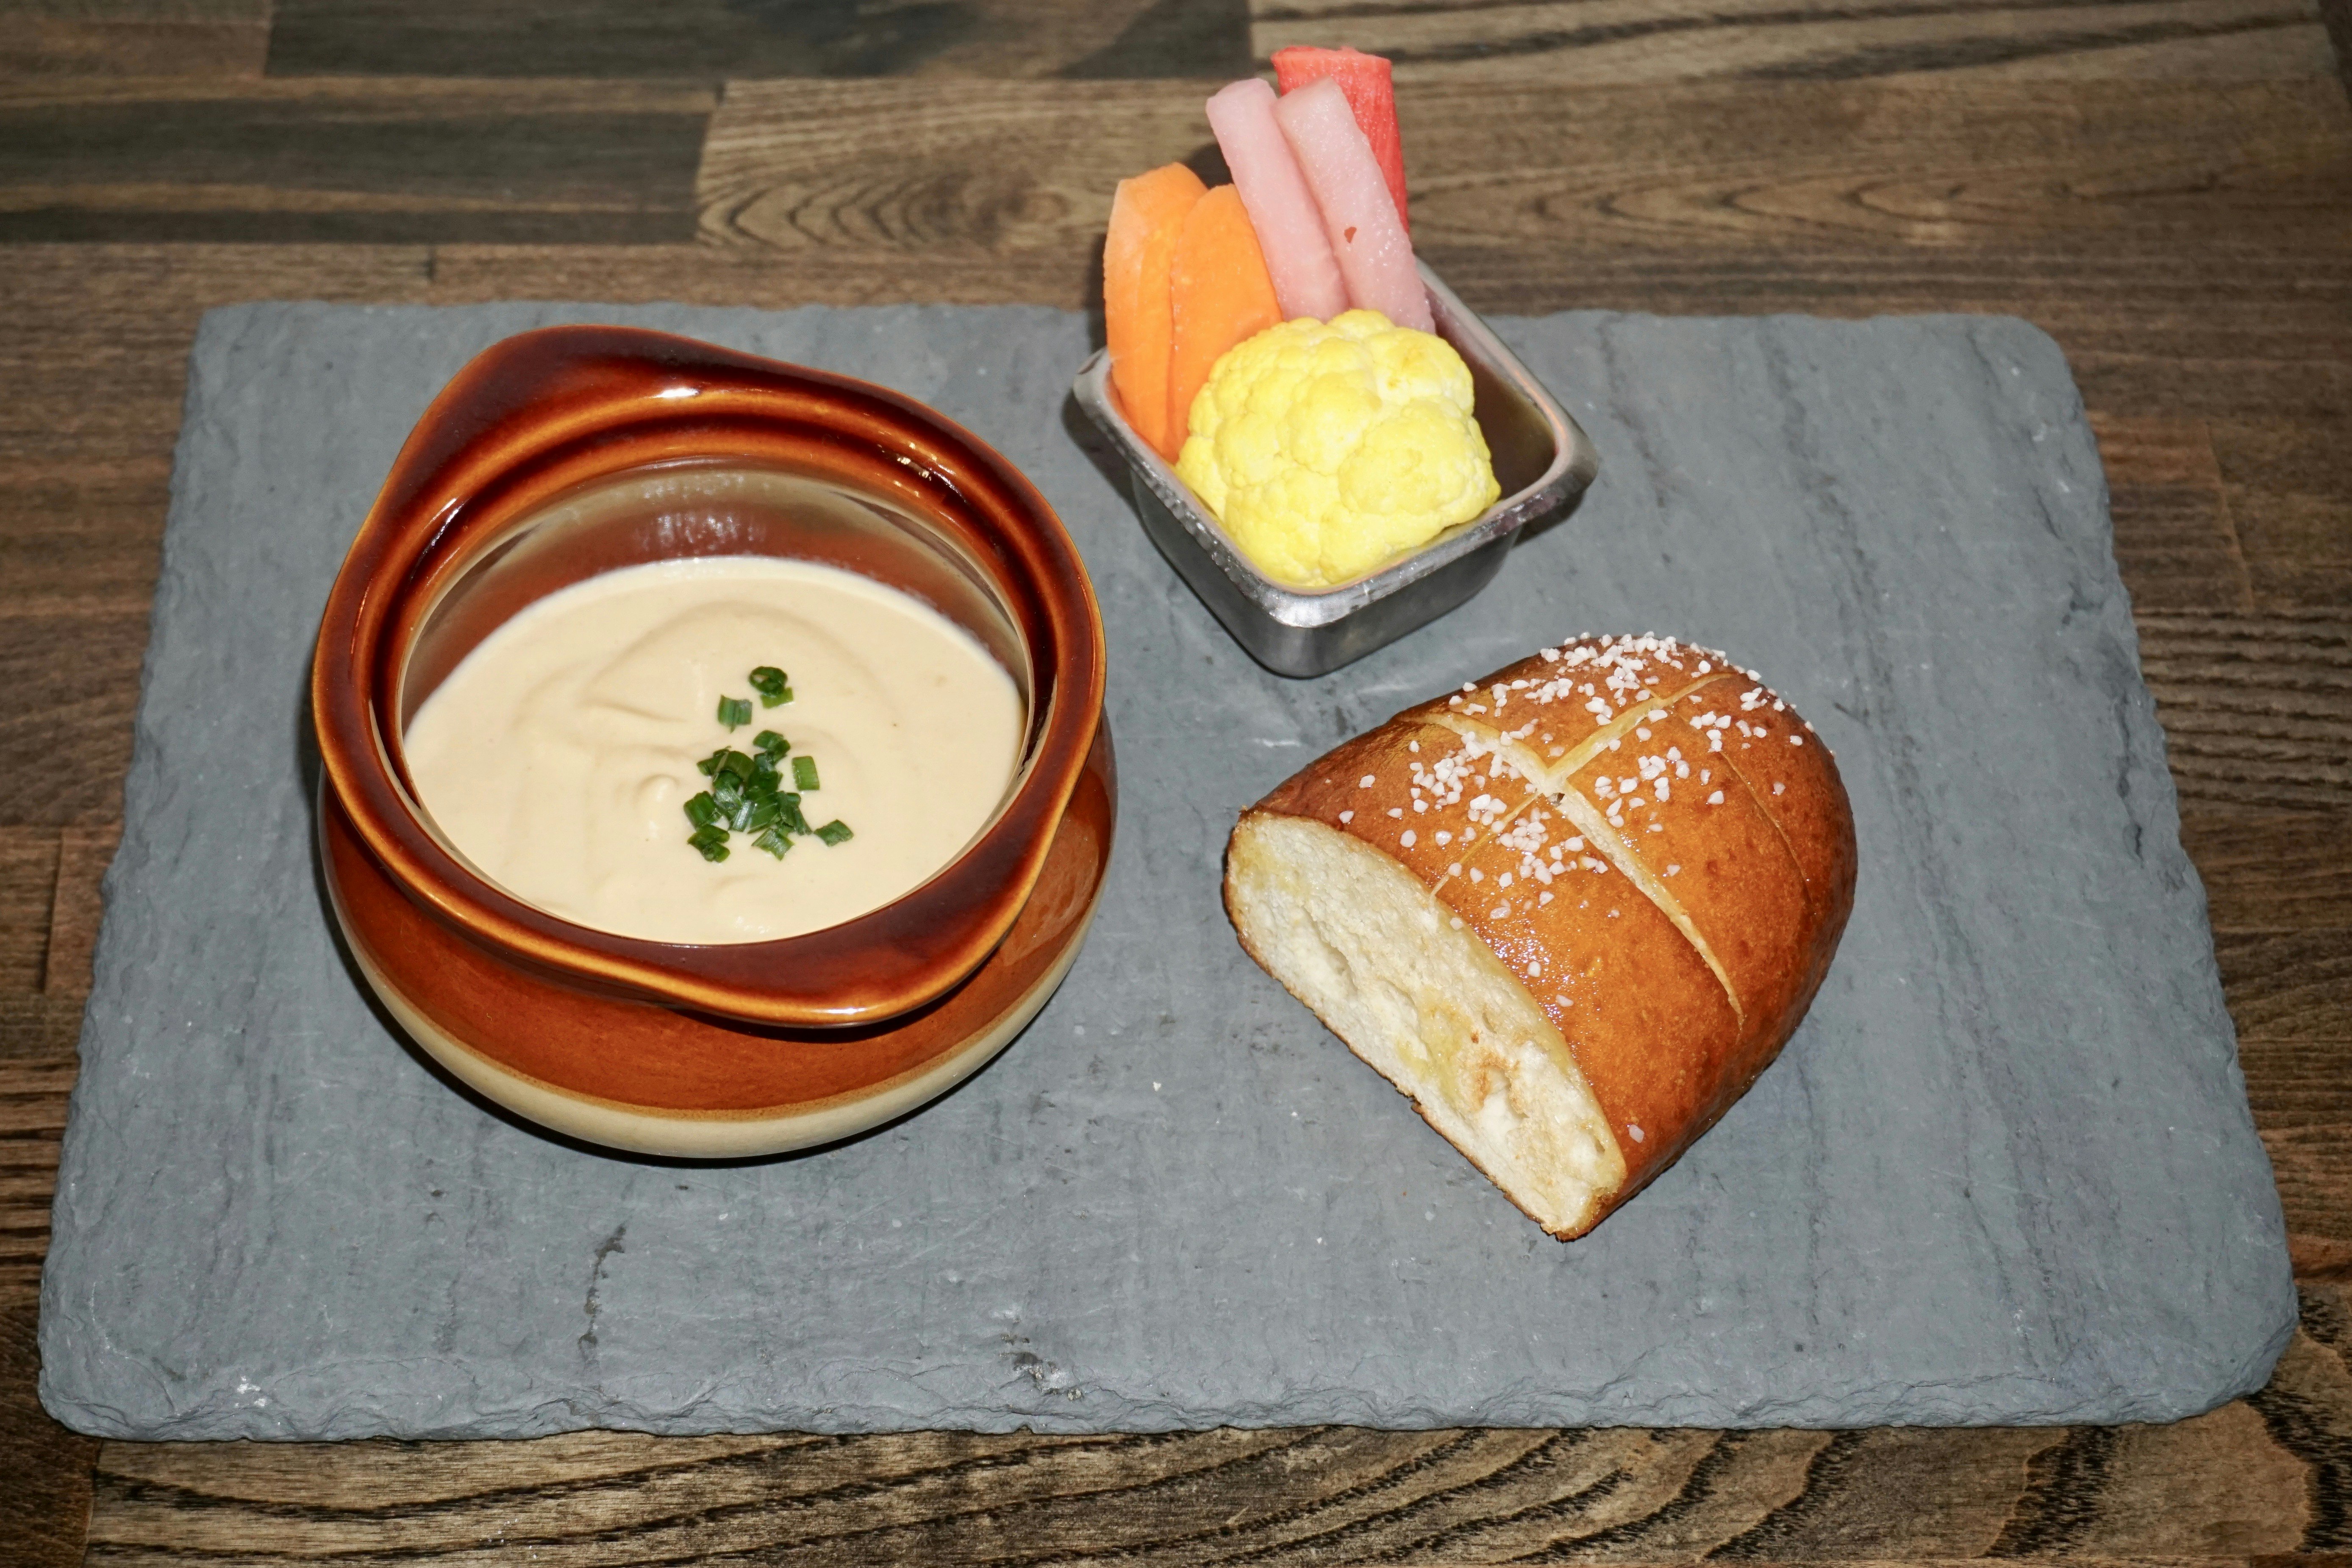 A gray slate, being used as a plate, sits on a dark wooden table; on the slate is a chunk of golden brown bread, a metal ramekin filled with crudités, and an earthenware bowl filled with molten vegan cheese, garnished with green herbs.